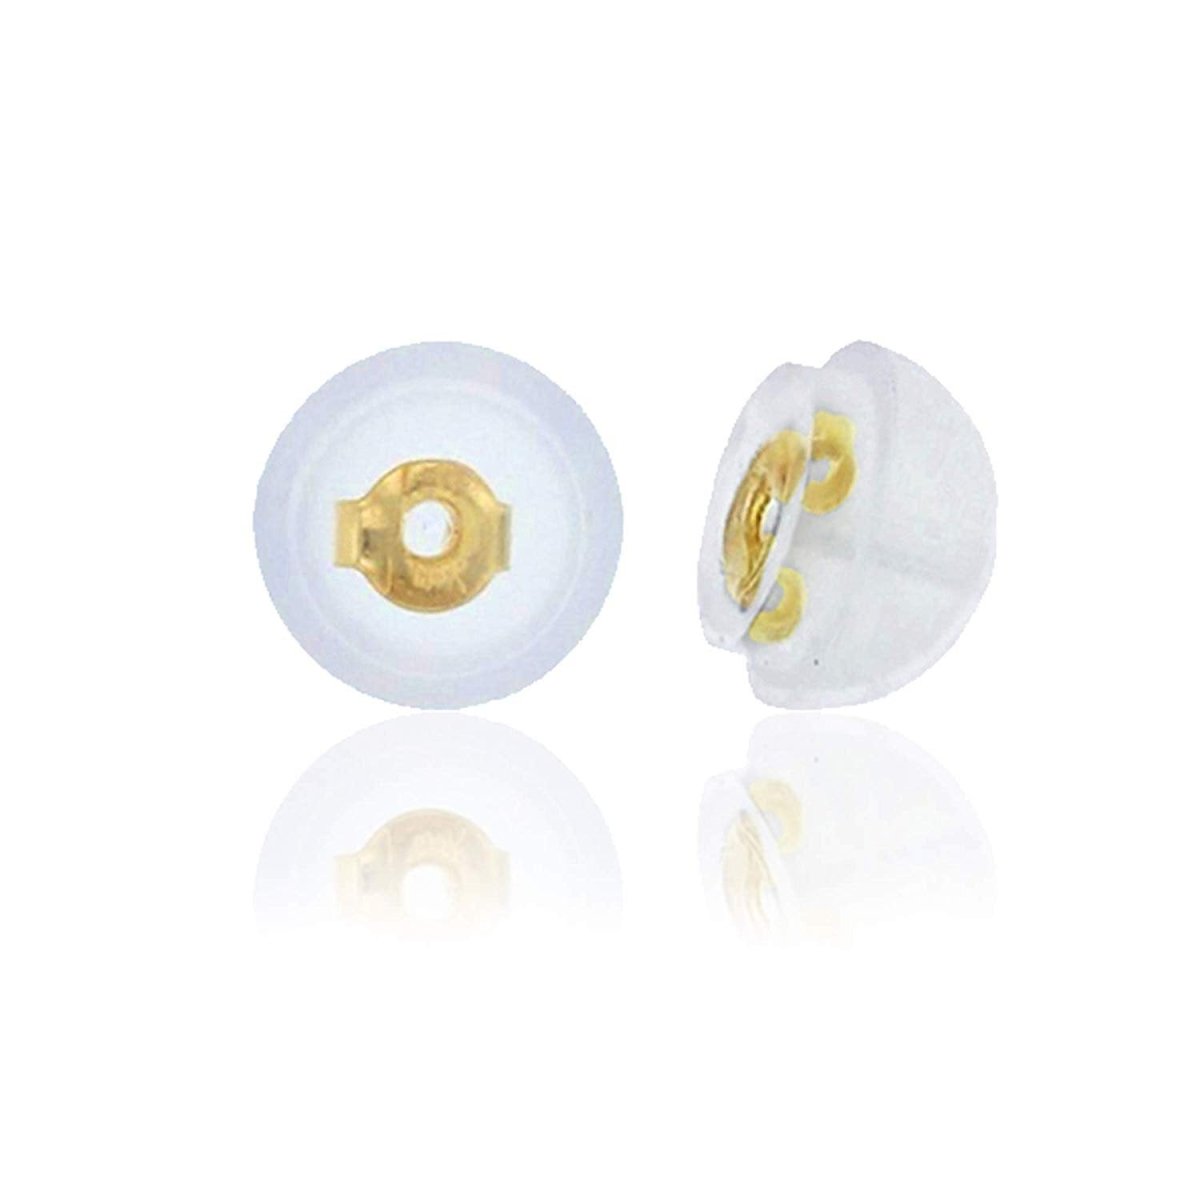 10 pair Gold Earring Backs Soft Clear Silicone Padded Mushroom Safety Grip Earring Backings Secure Hypoallergenic Pierced Studs Silver Back K-921 K-922 - DLUXCA